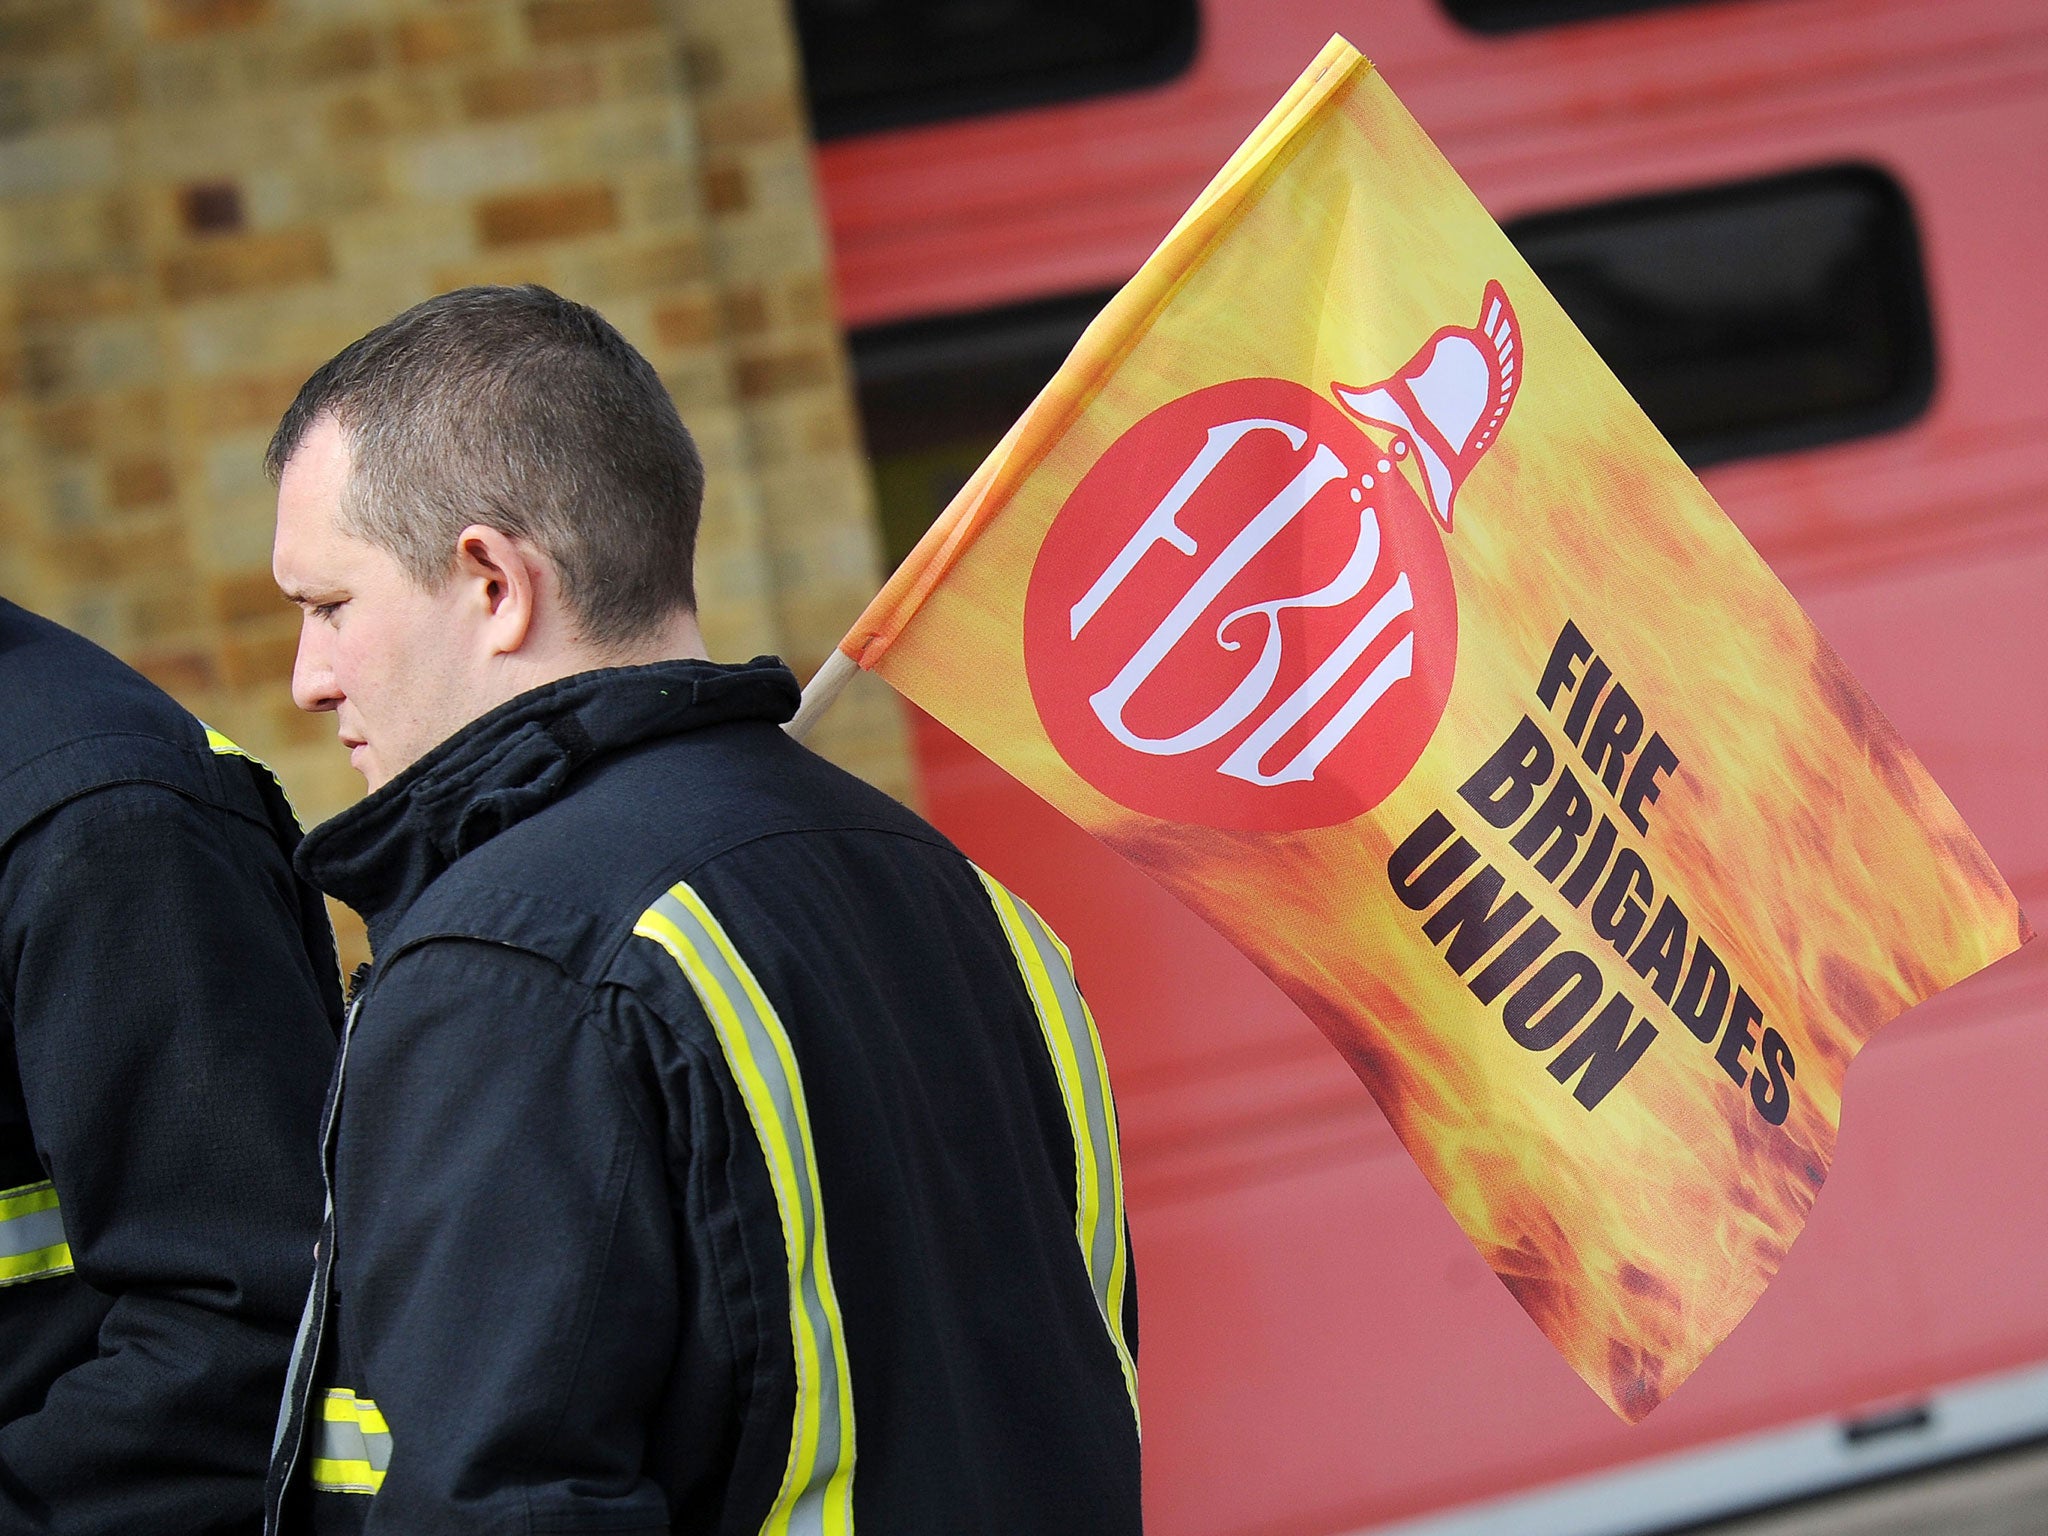 Firefighters and Fire Service staff from Wiltshire gather on the picket line outside Drove Road fire station in Swindon